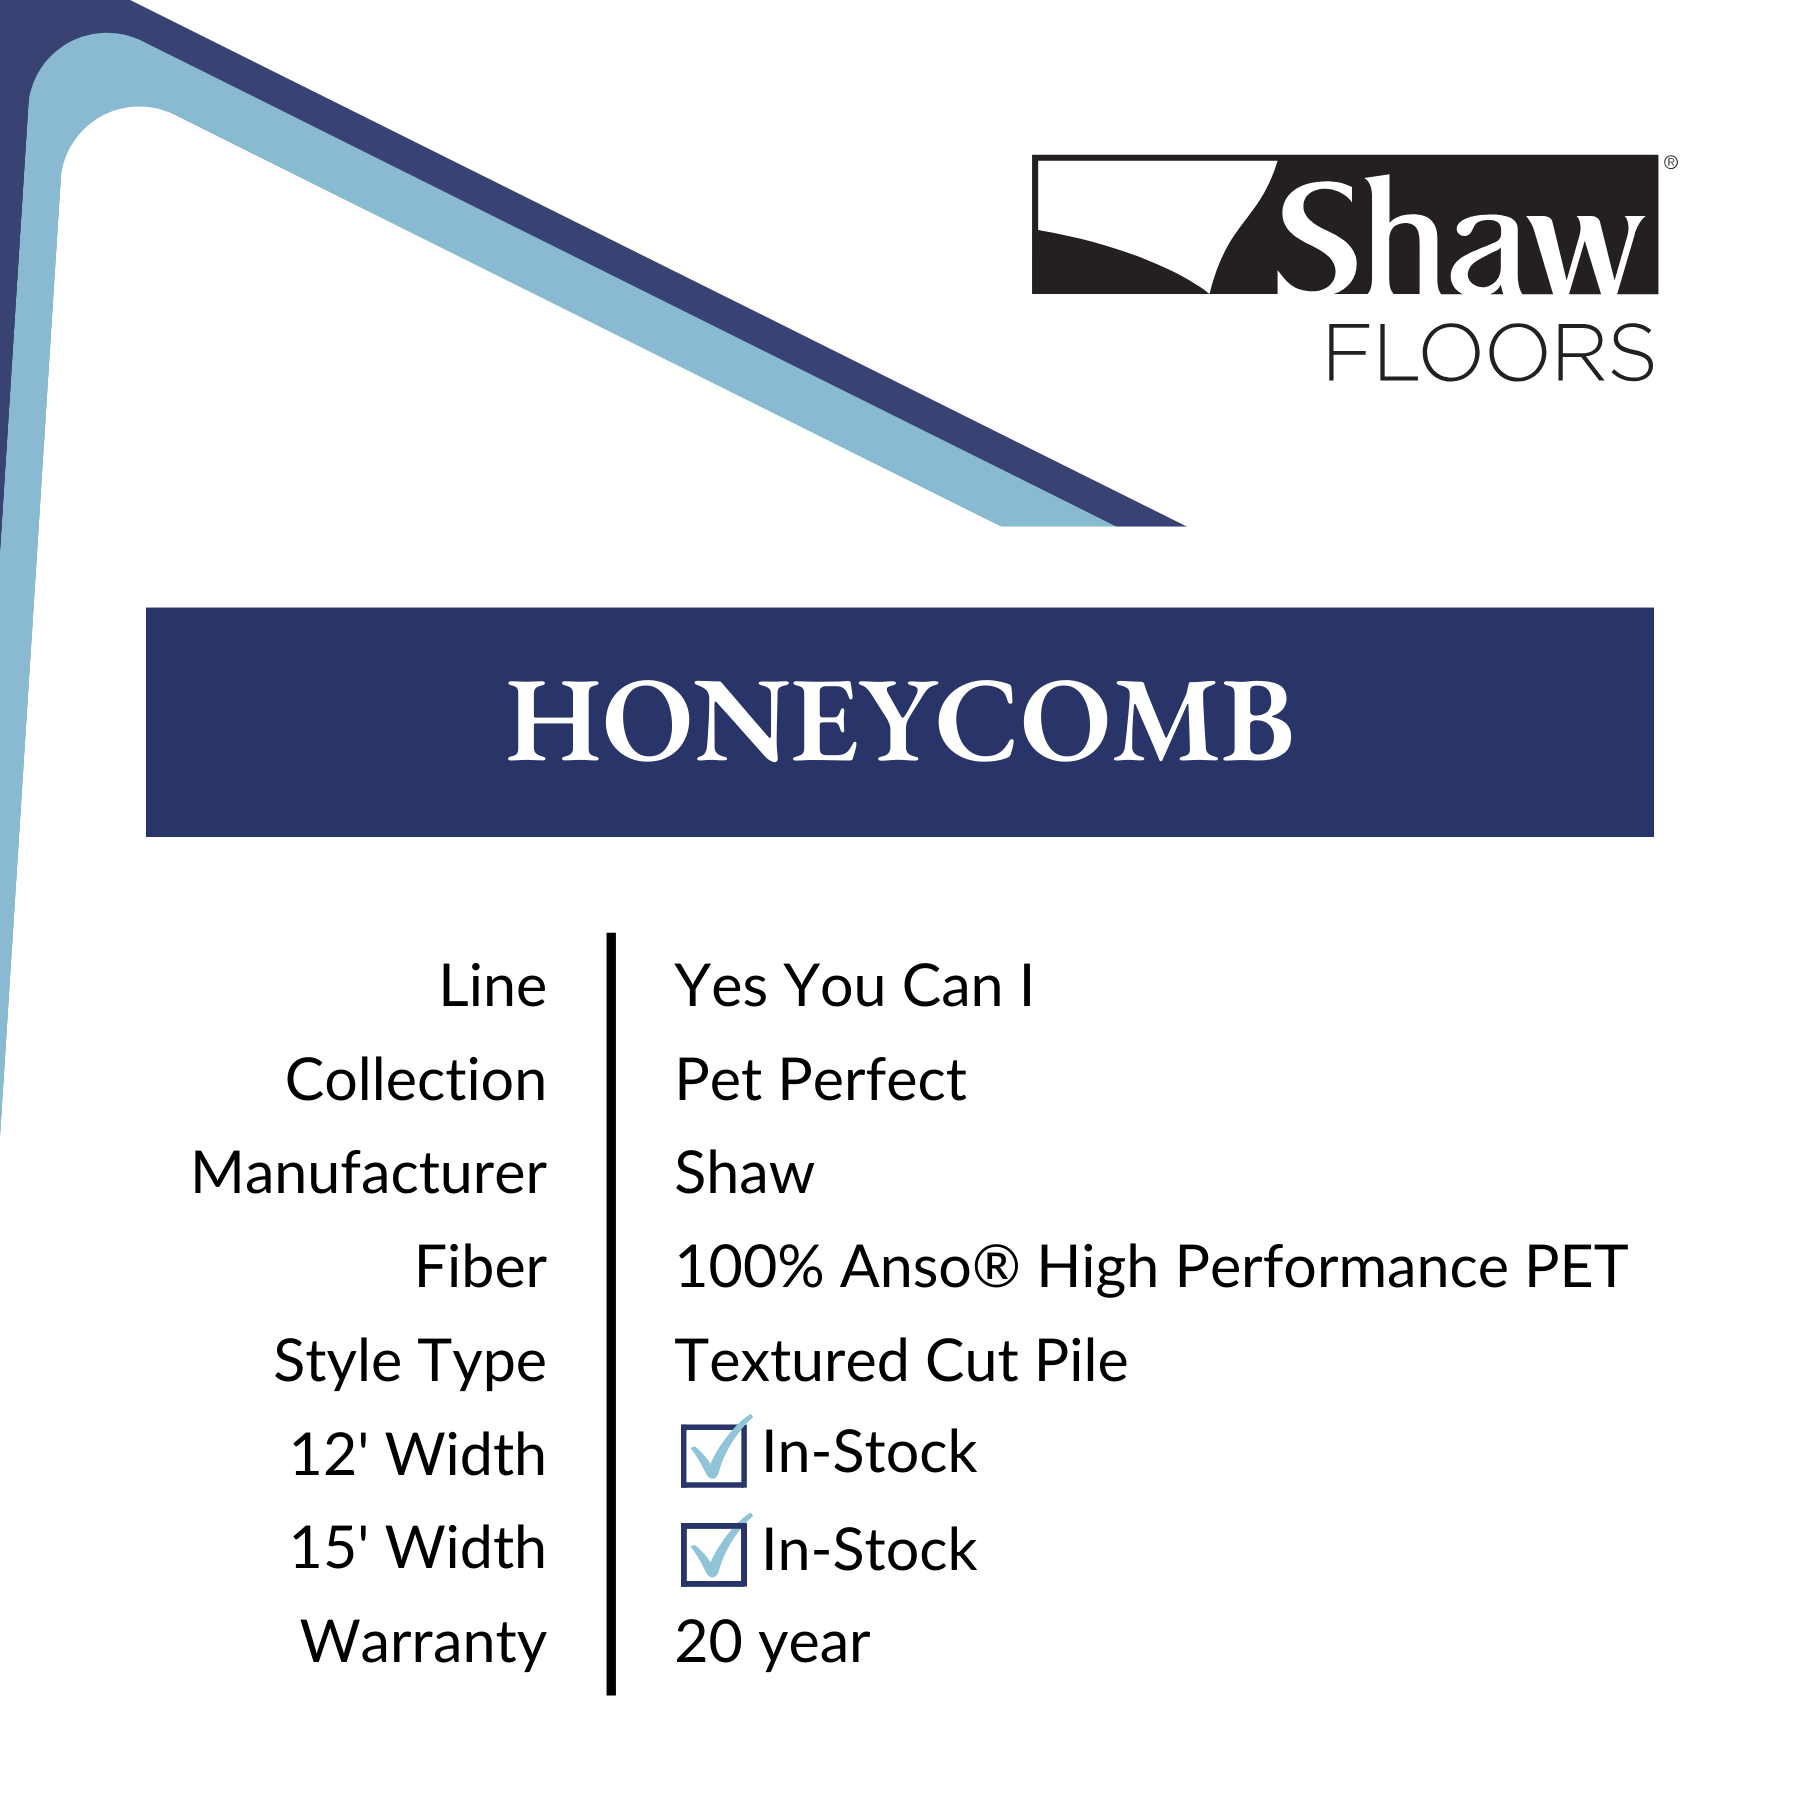 Honeycomb Shaw Pet Perfect Plus Yes You Can I Carpet from Calhoun's Flooring Springfield IL Specs